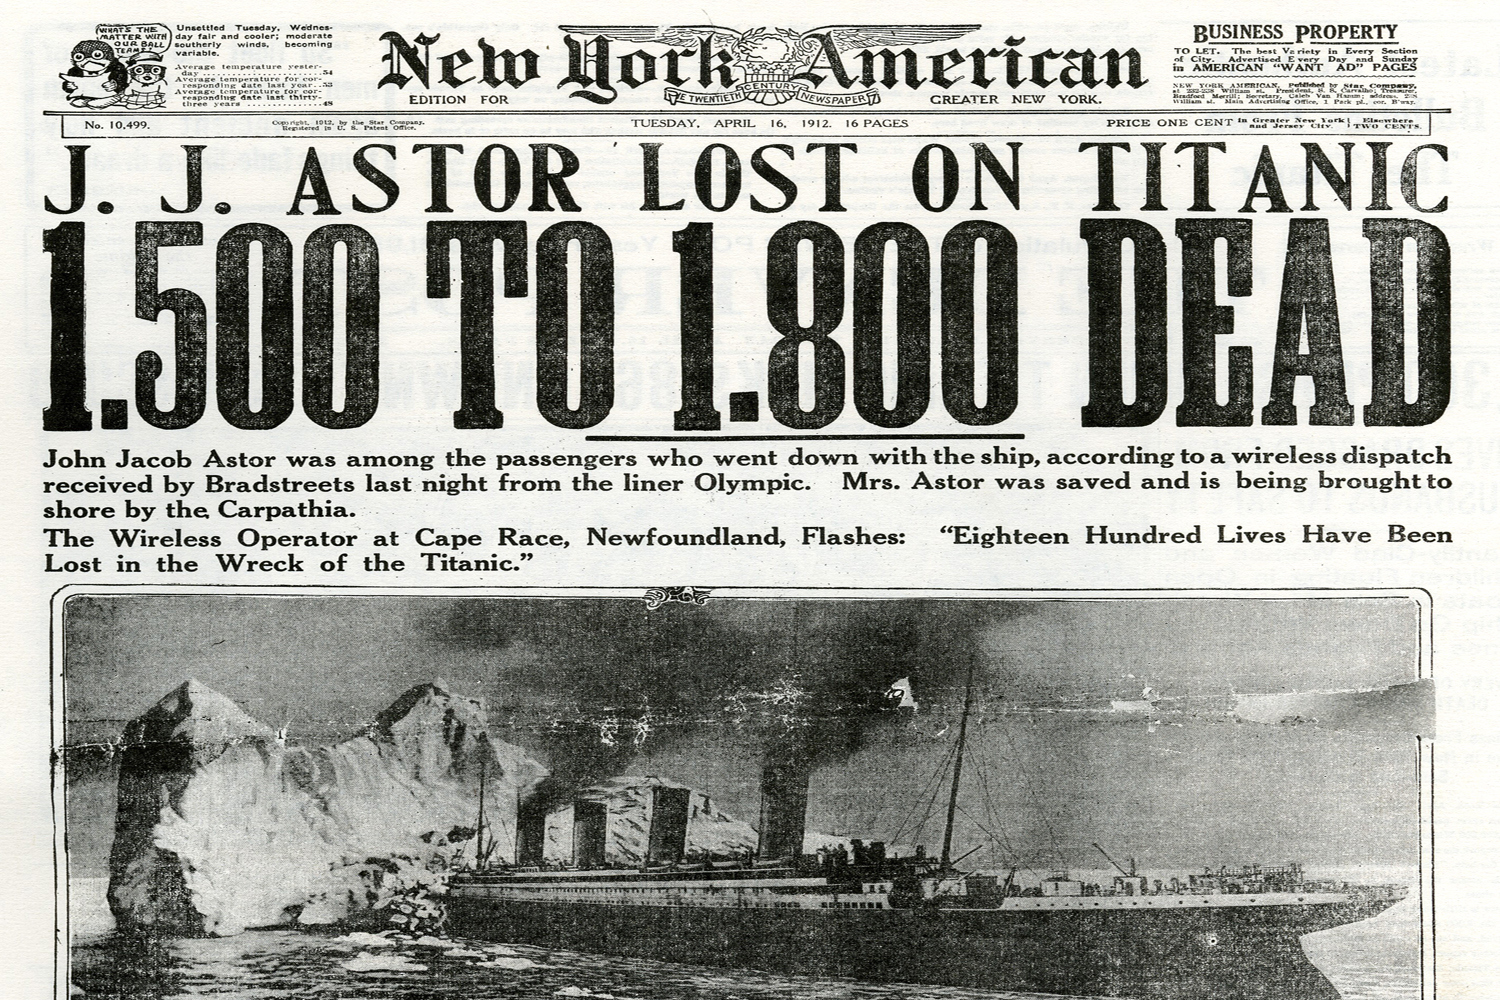 The sinking of the Titanic led to the creation of the U.S. Federal Reserve 9